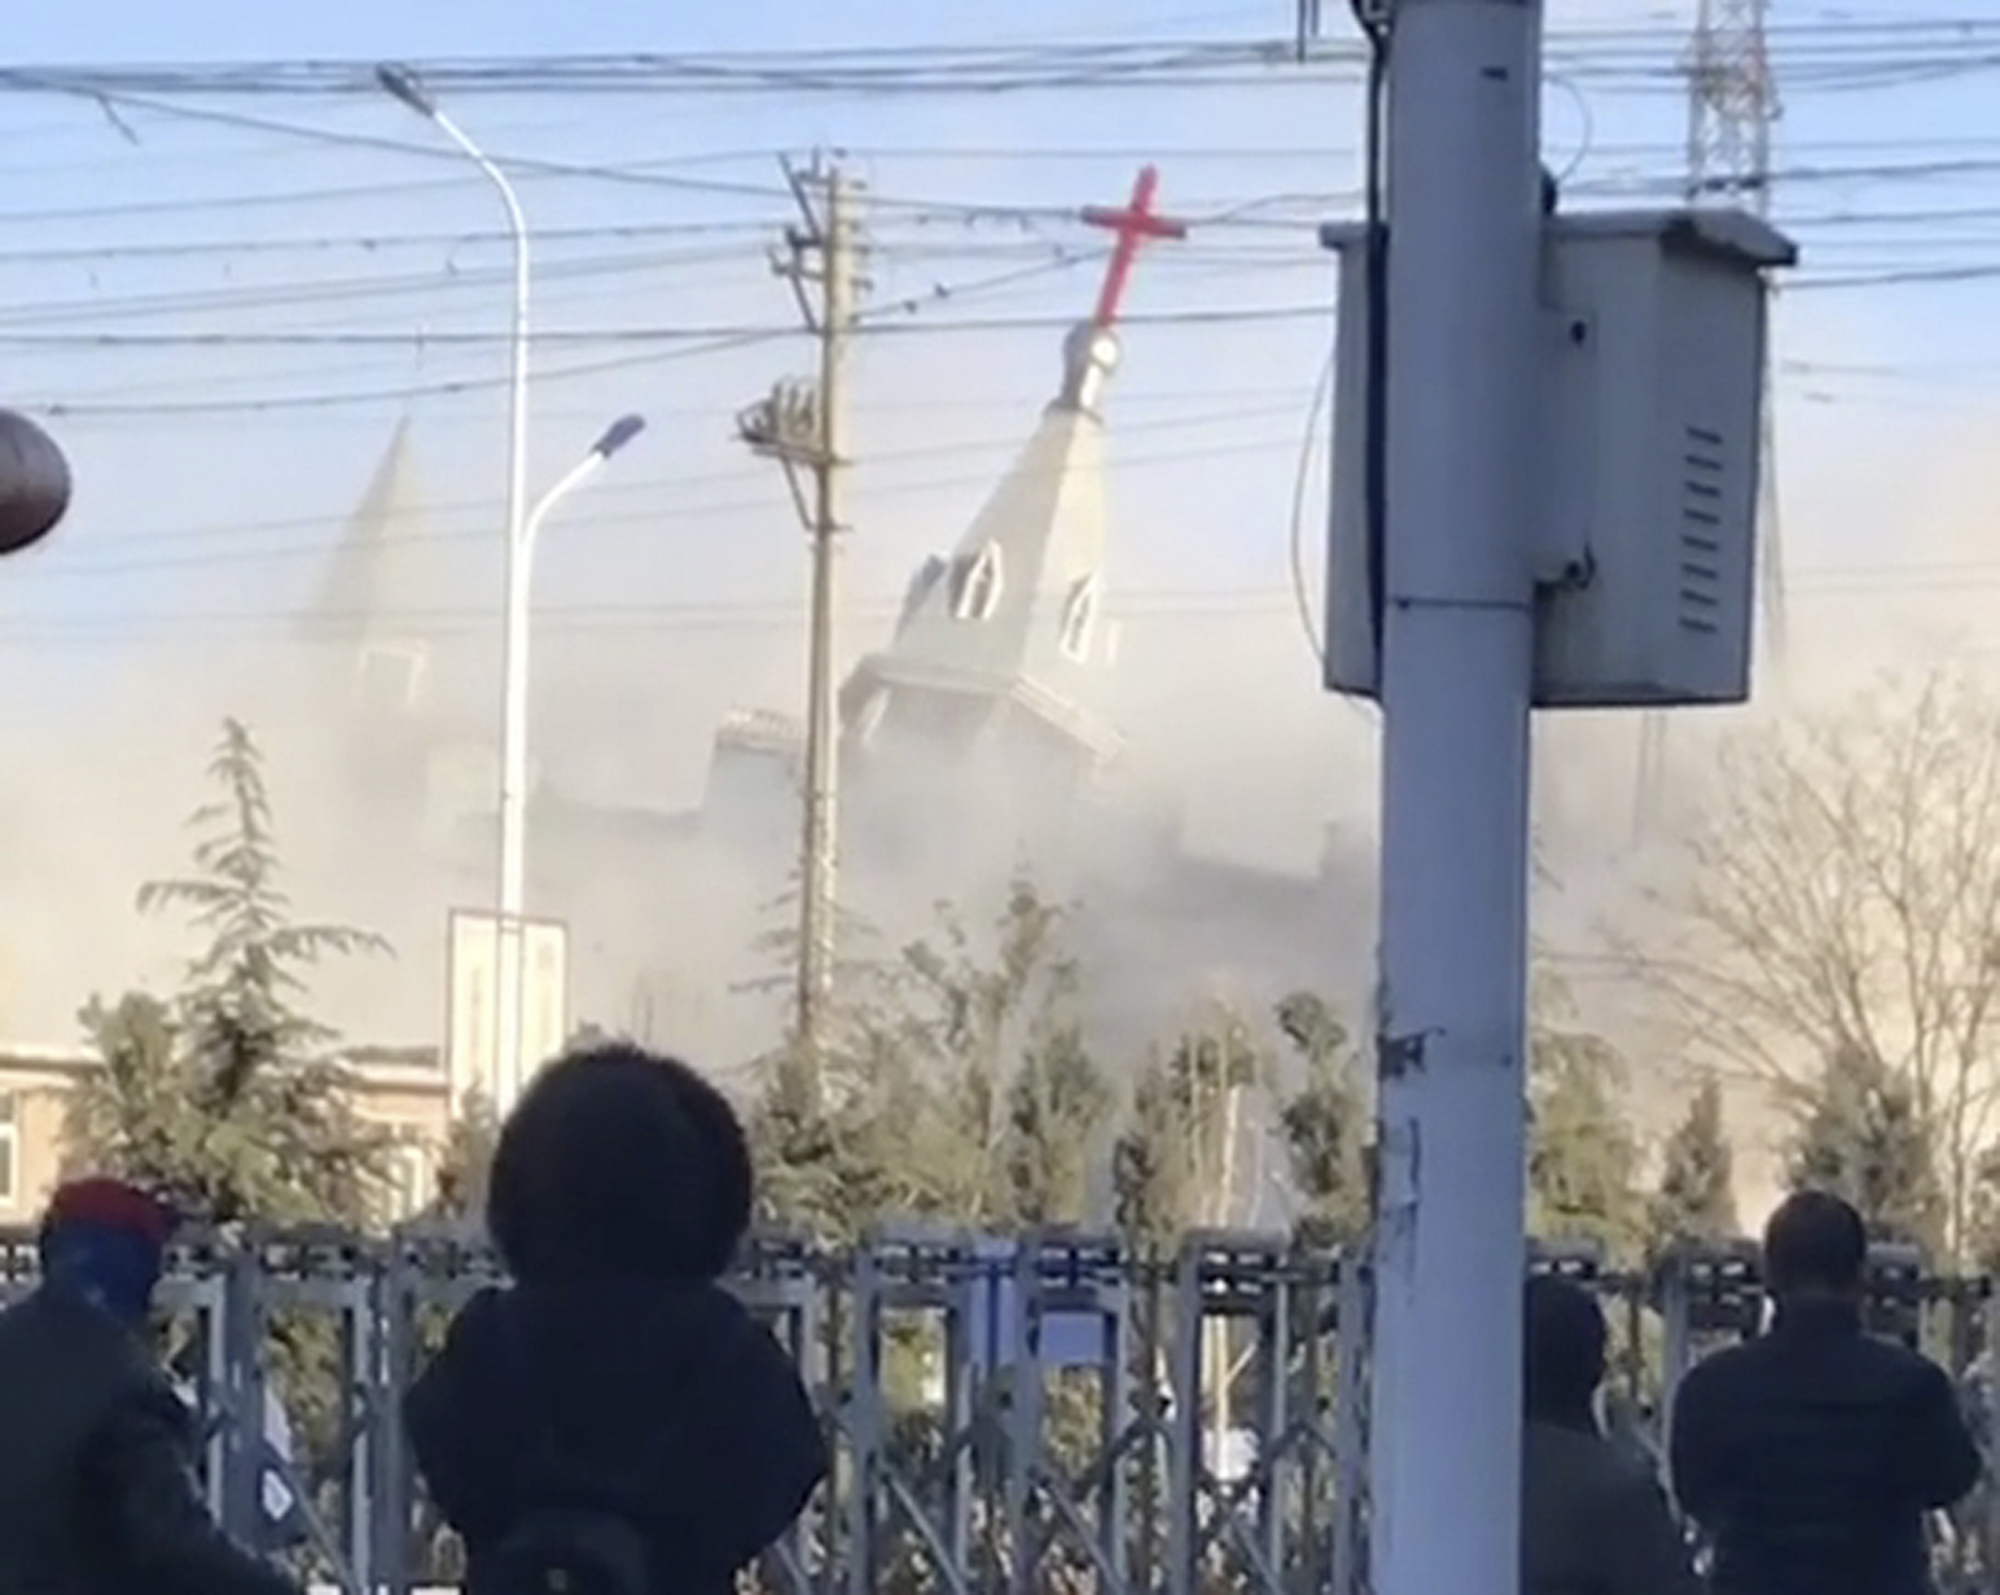 In this image taken from video shot Tuesday, Jan. 9, 2018, by China Aid and provided to the Associated Press, people watch the demolition of the Golden Lampstand Church in Linfen in northern China's Shanxi province. Witnesses and overseas activists say paramilitary troops known as the People's Armed Police used excavators and dynamite on Tuesday to destroy the Golden Lampstand Church, a Christian mega-church that clashed with the government. (China Aid via AP)